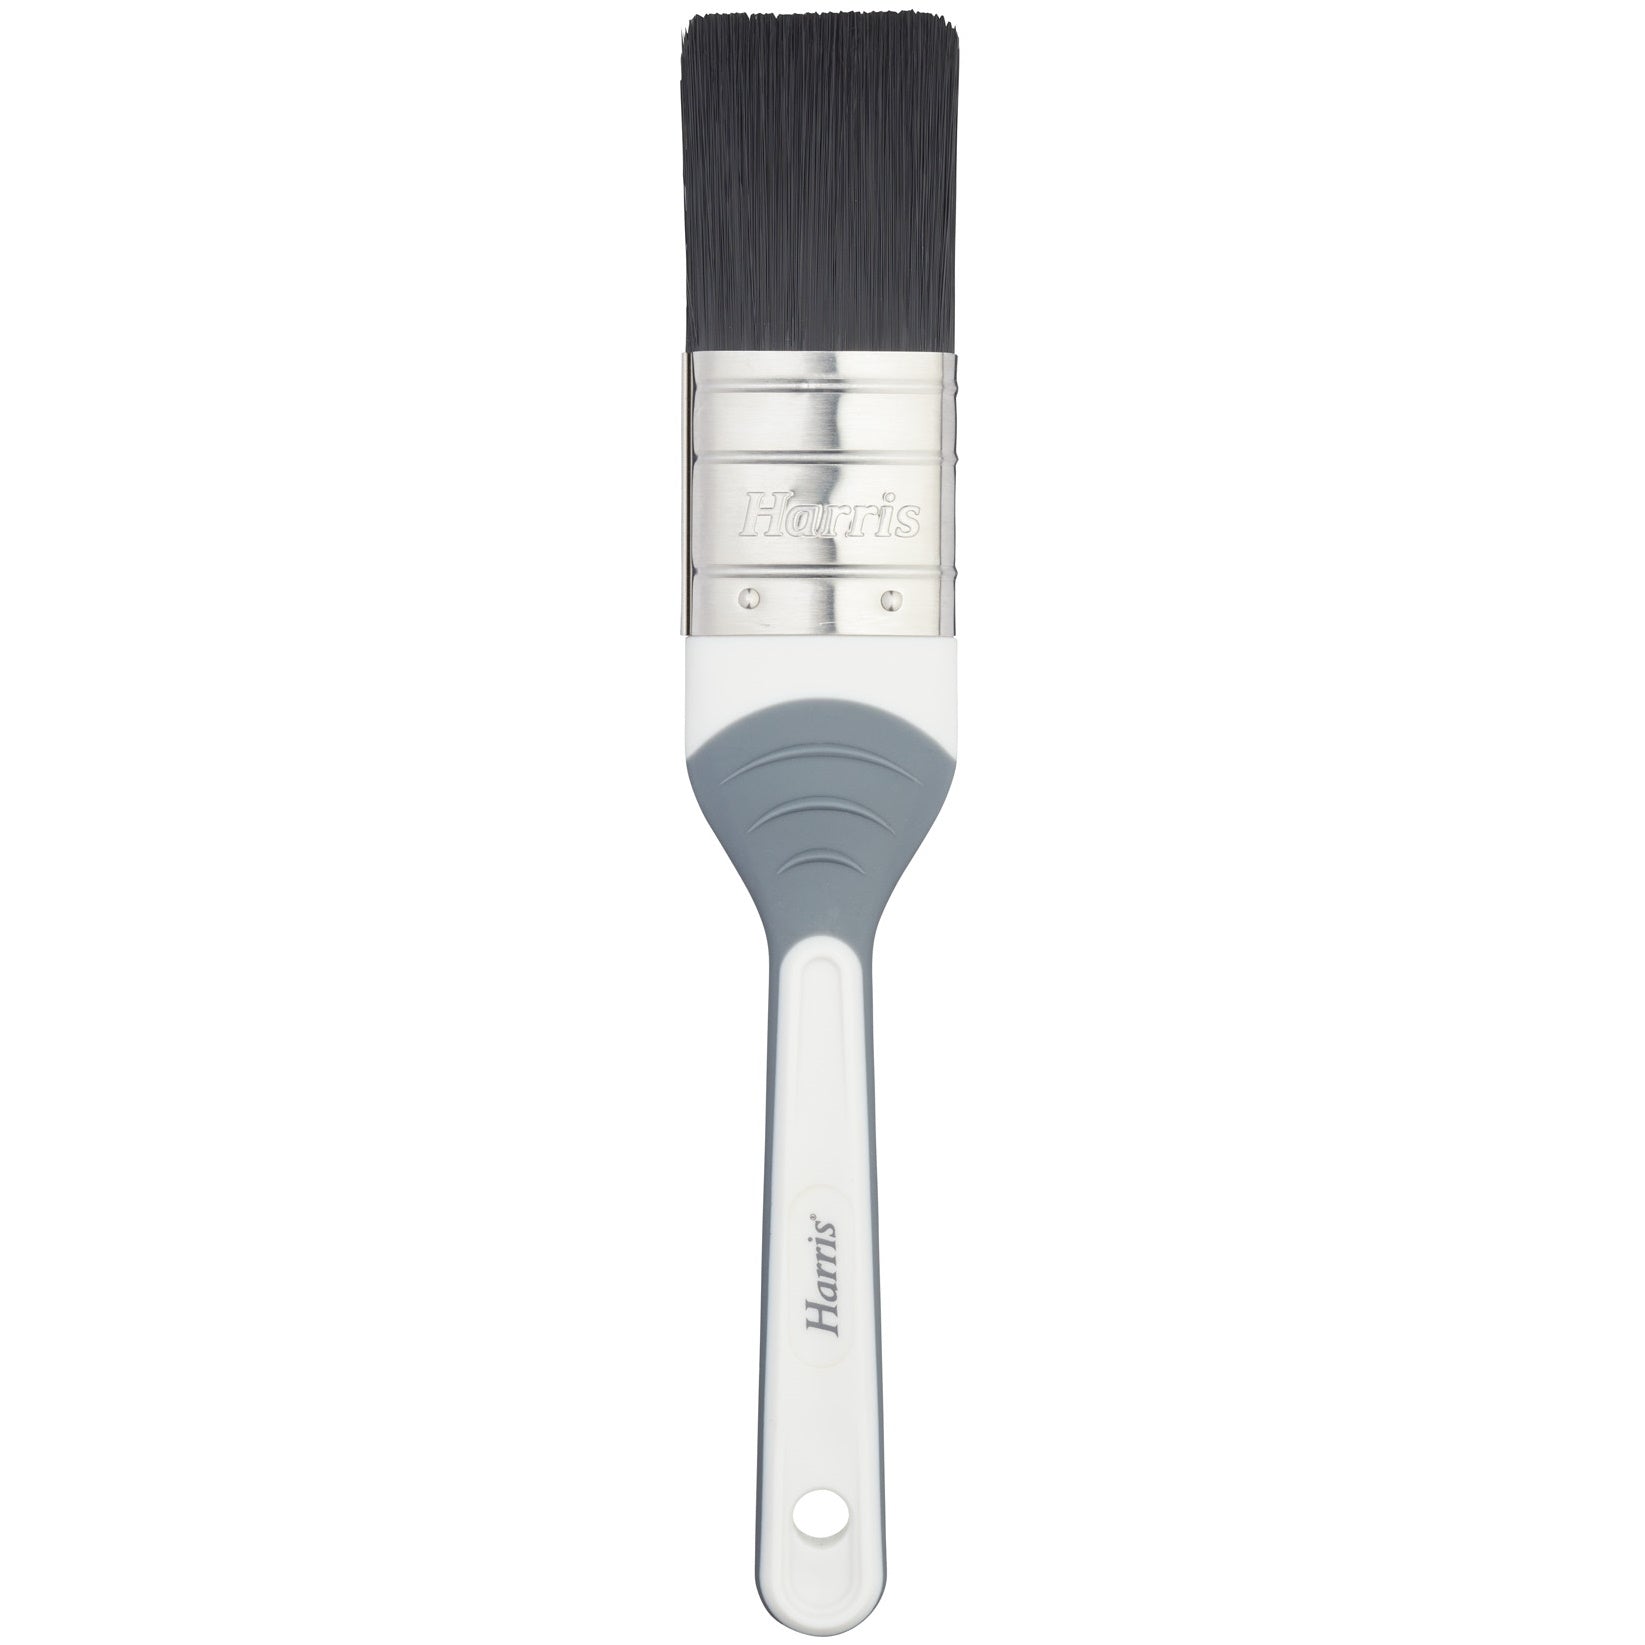 Harris Seriously Good Woodwork Gloss Paint Brushes - Various Sizes - Premium Paint Brushes from HARRIS - Just $1.99! Shop now at W Hurst & Son (IW) Ltd